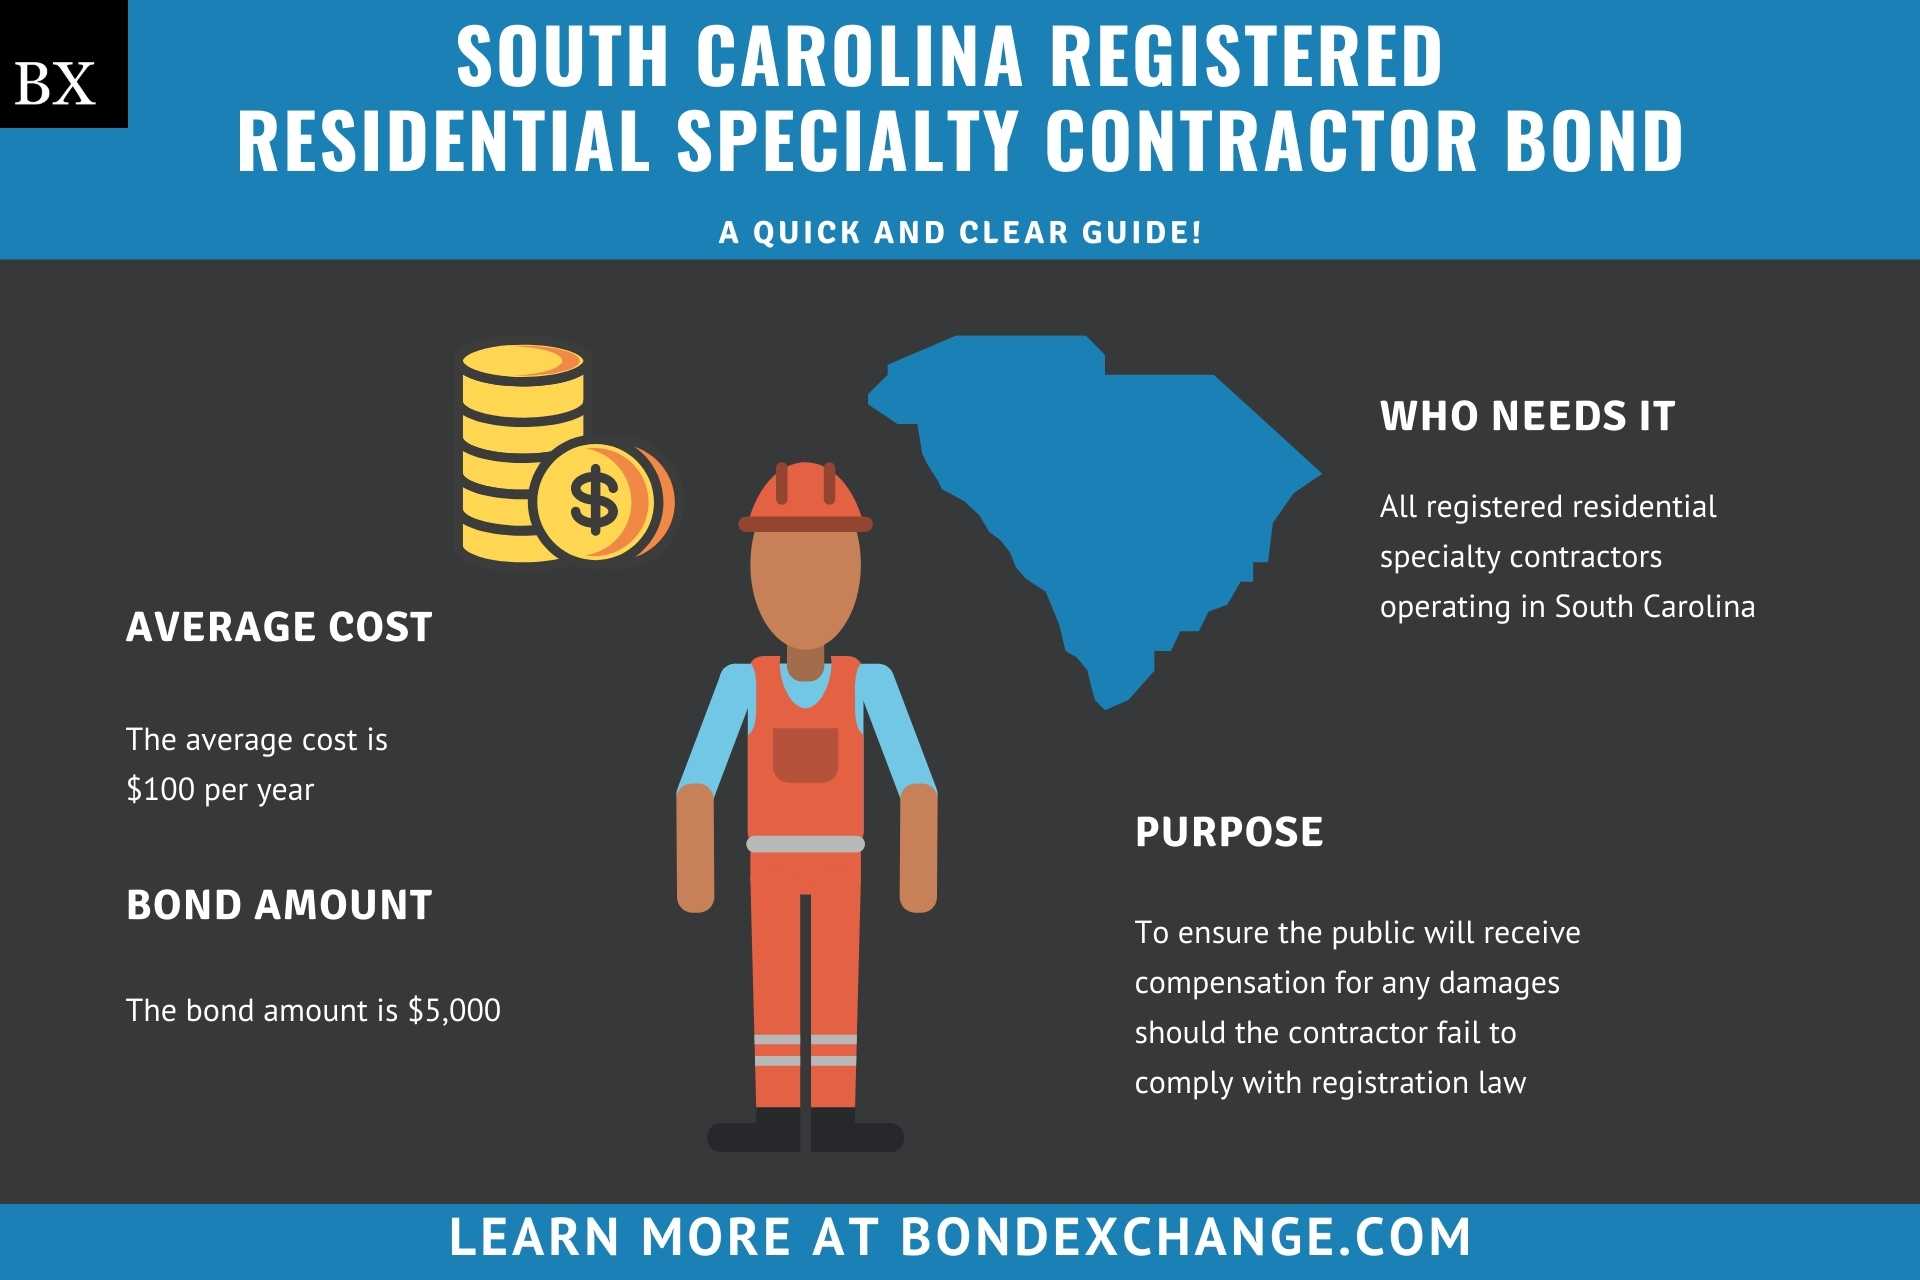 South Carolina Registered Residential Specialty Contractor Bond